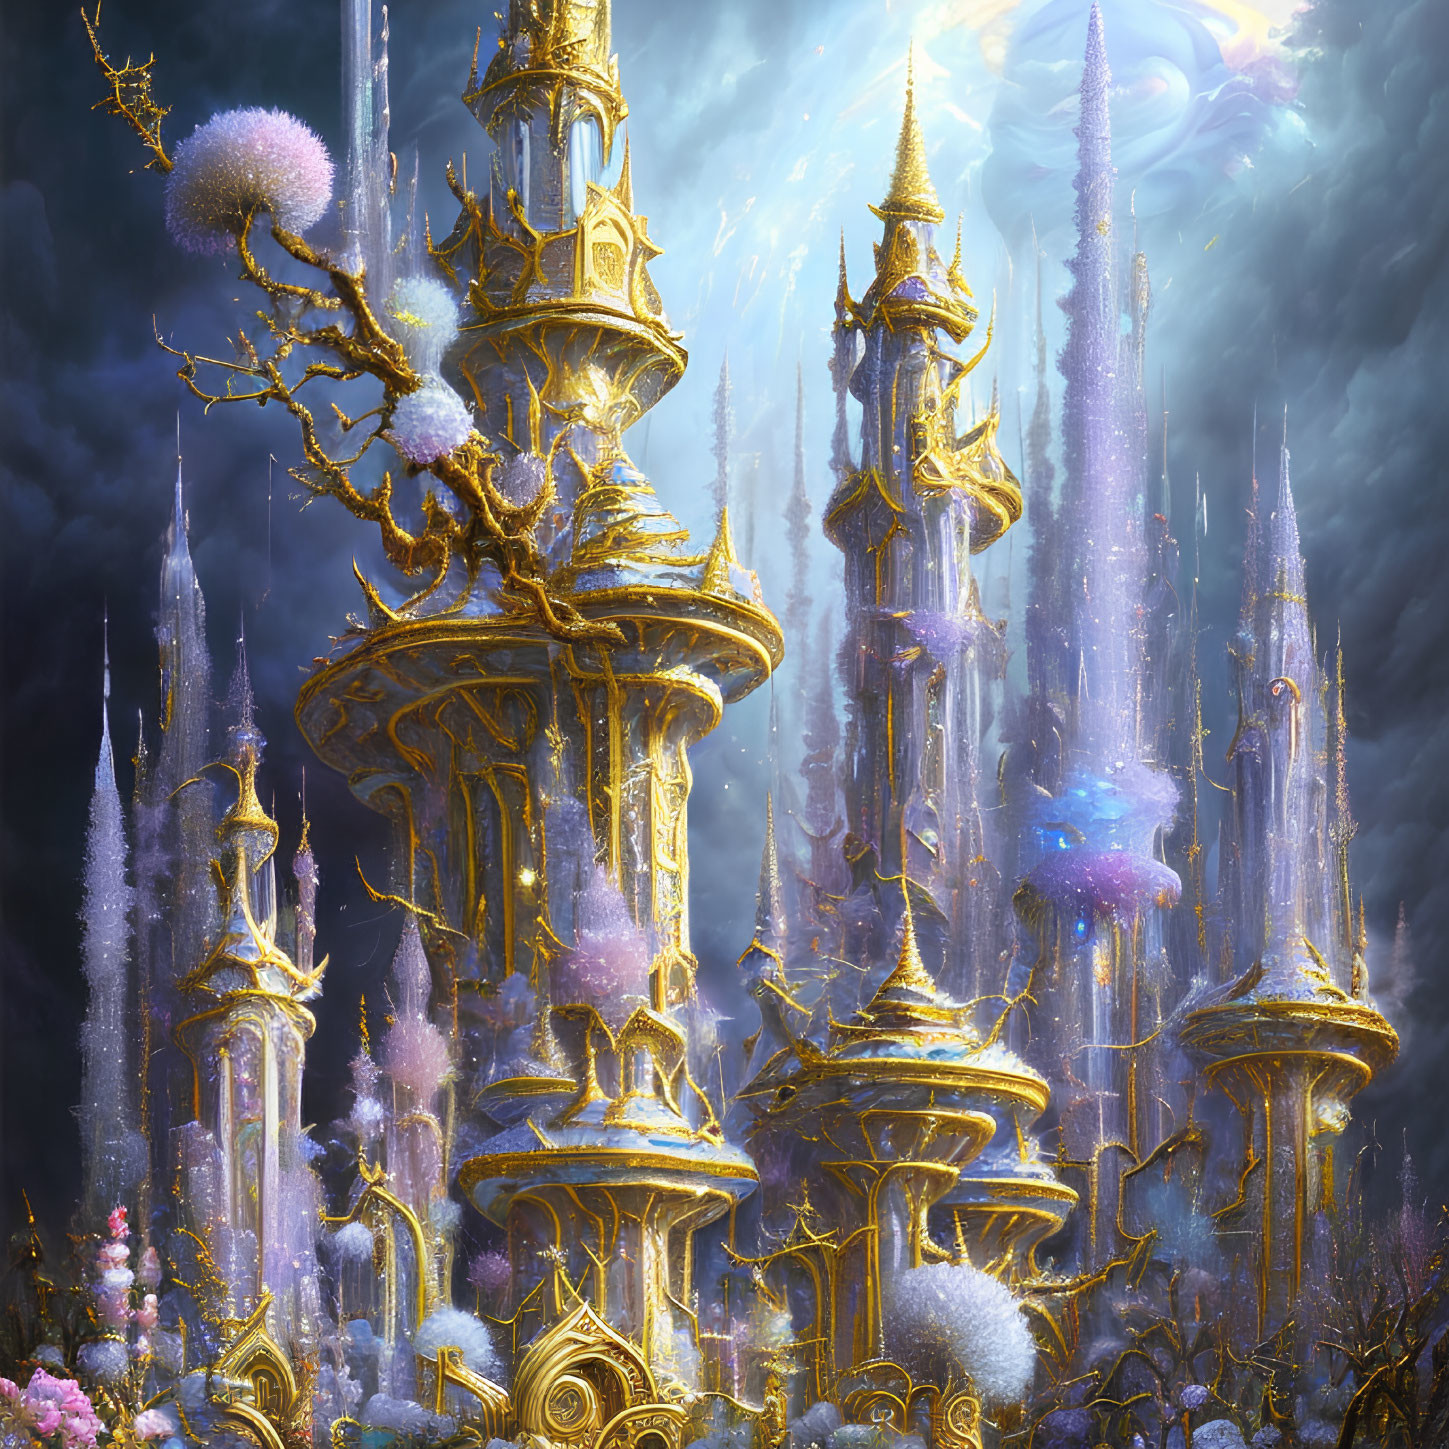 Ethereal fantasy landscape with glowing golden towers and magical surroundings